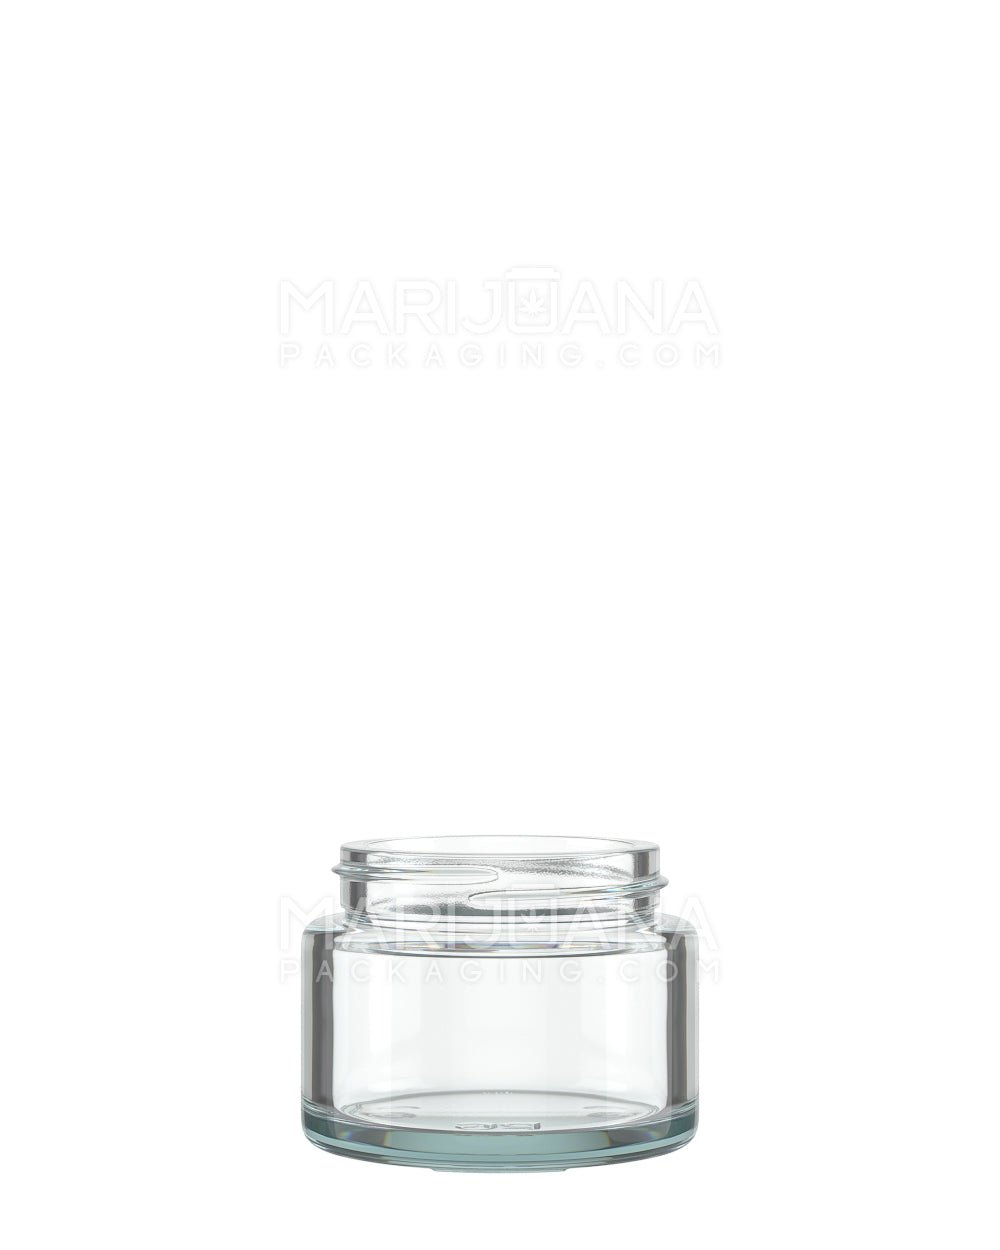 Clear Round Wide-Mouth Plastic Jars Bulk Pack - 6 oz, Jars Only